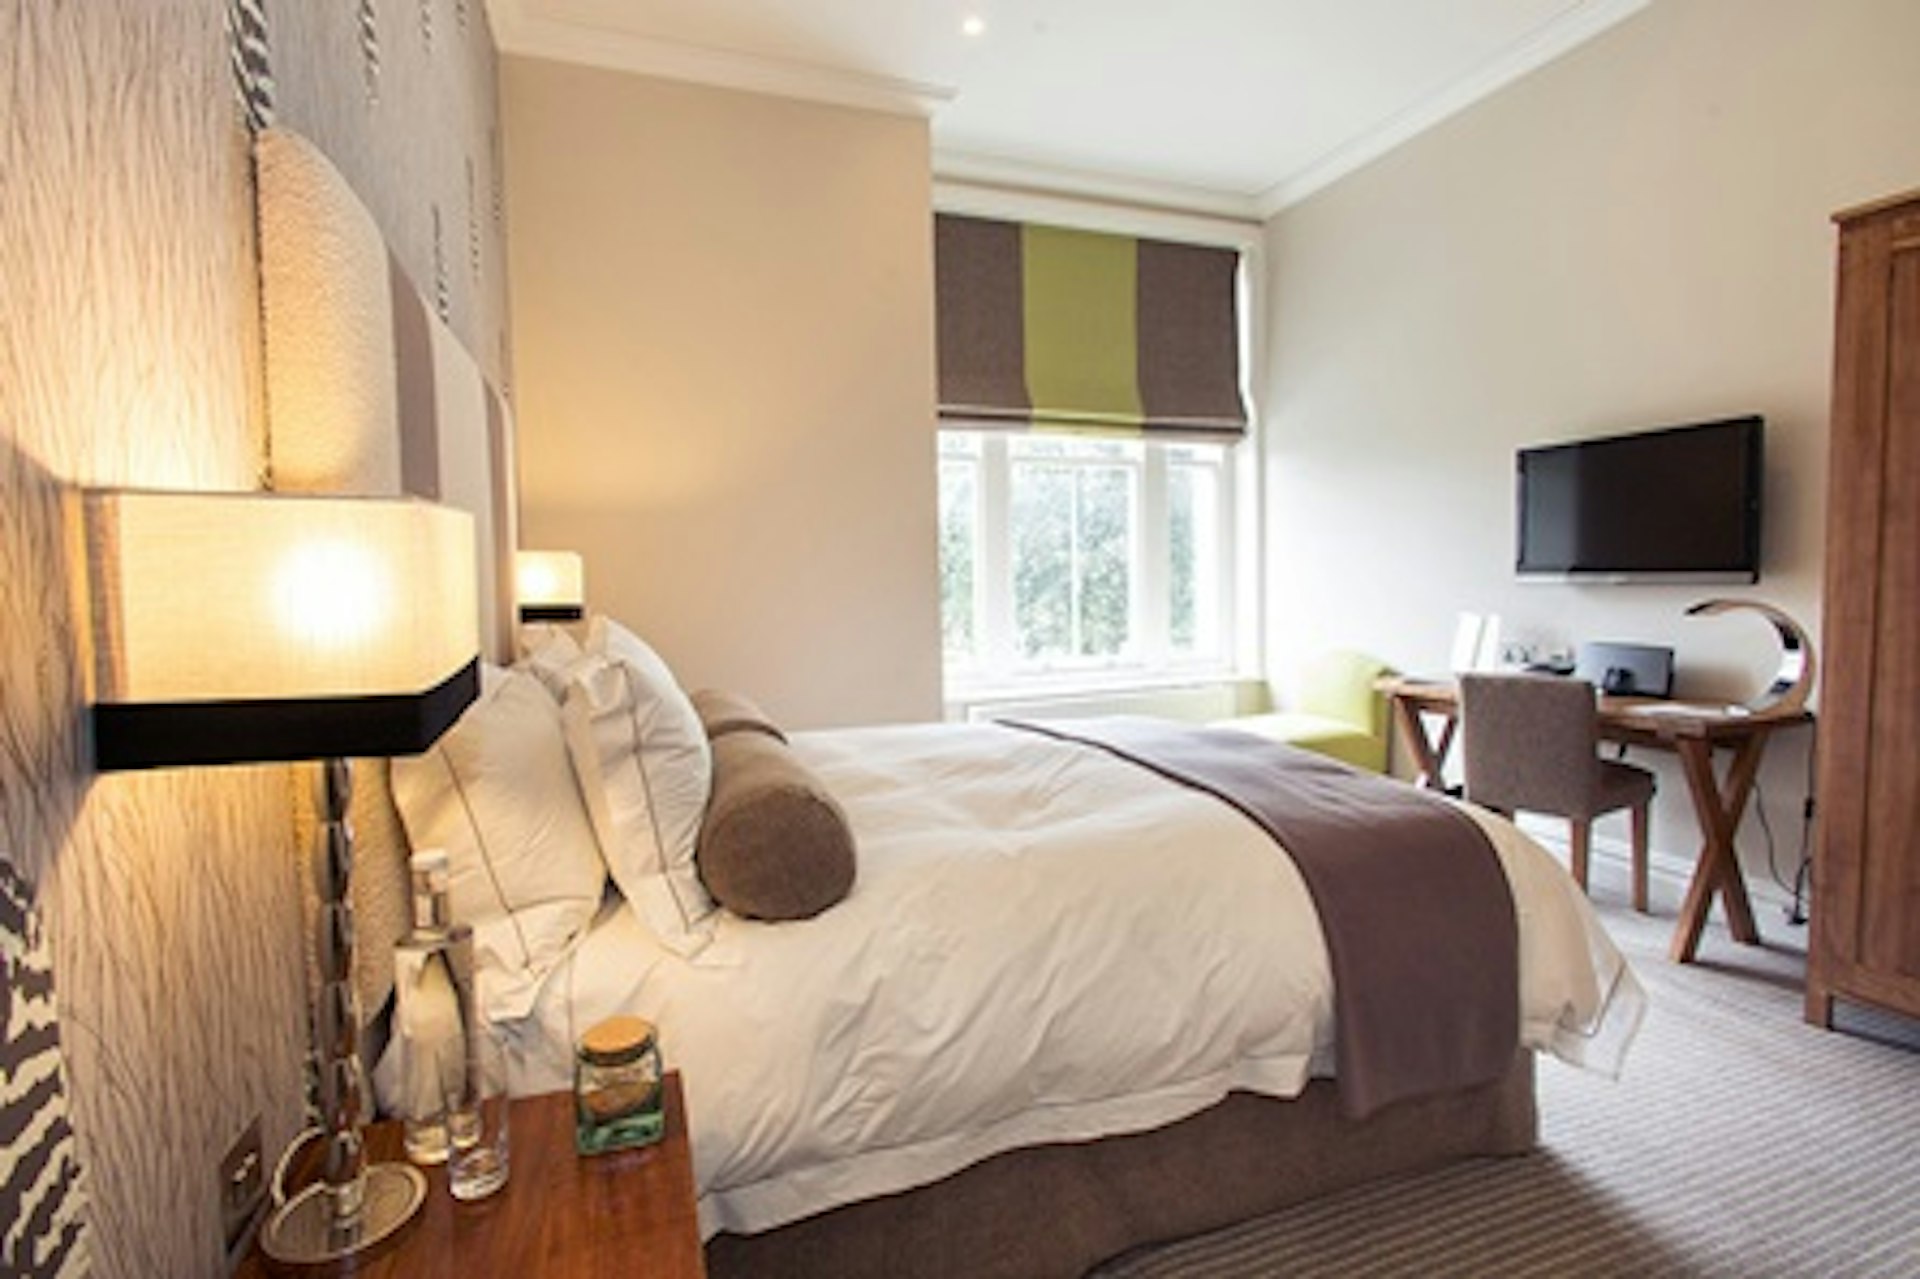 One Night Coastal Escape with Dinner and Champagne for Two at the Luxury 4* Green House Hotel, Bournemouth 2